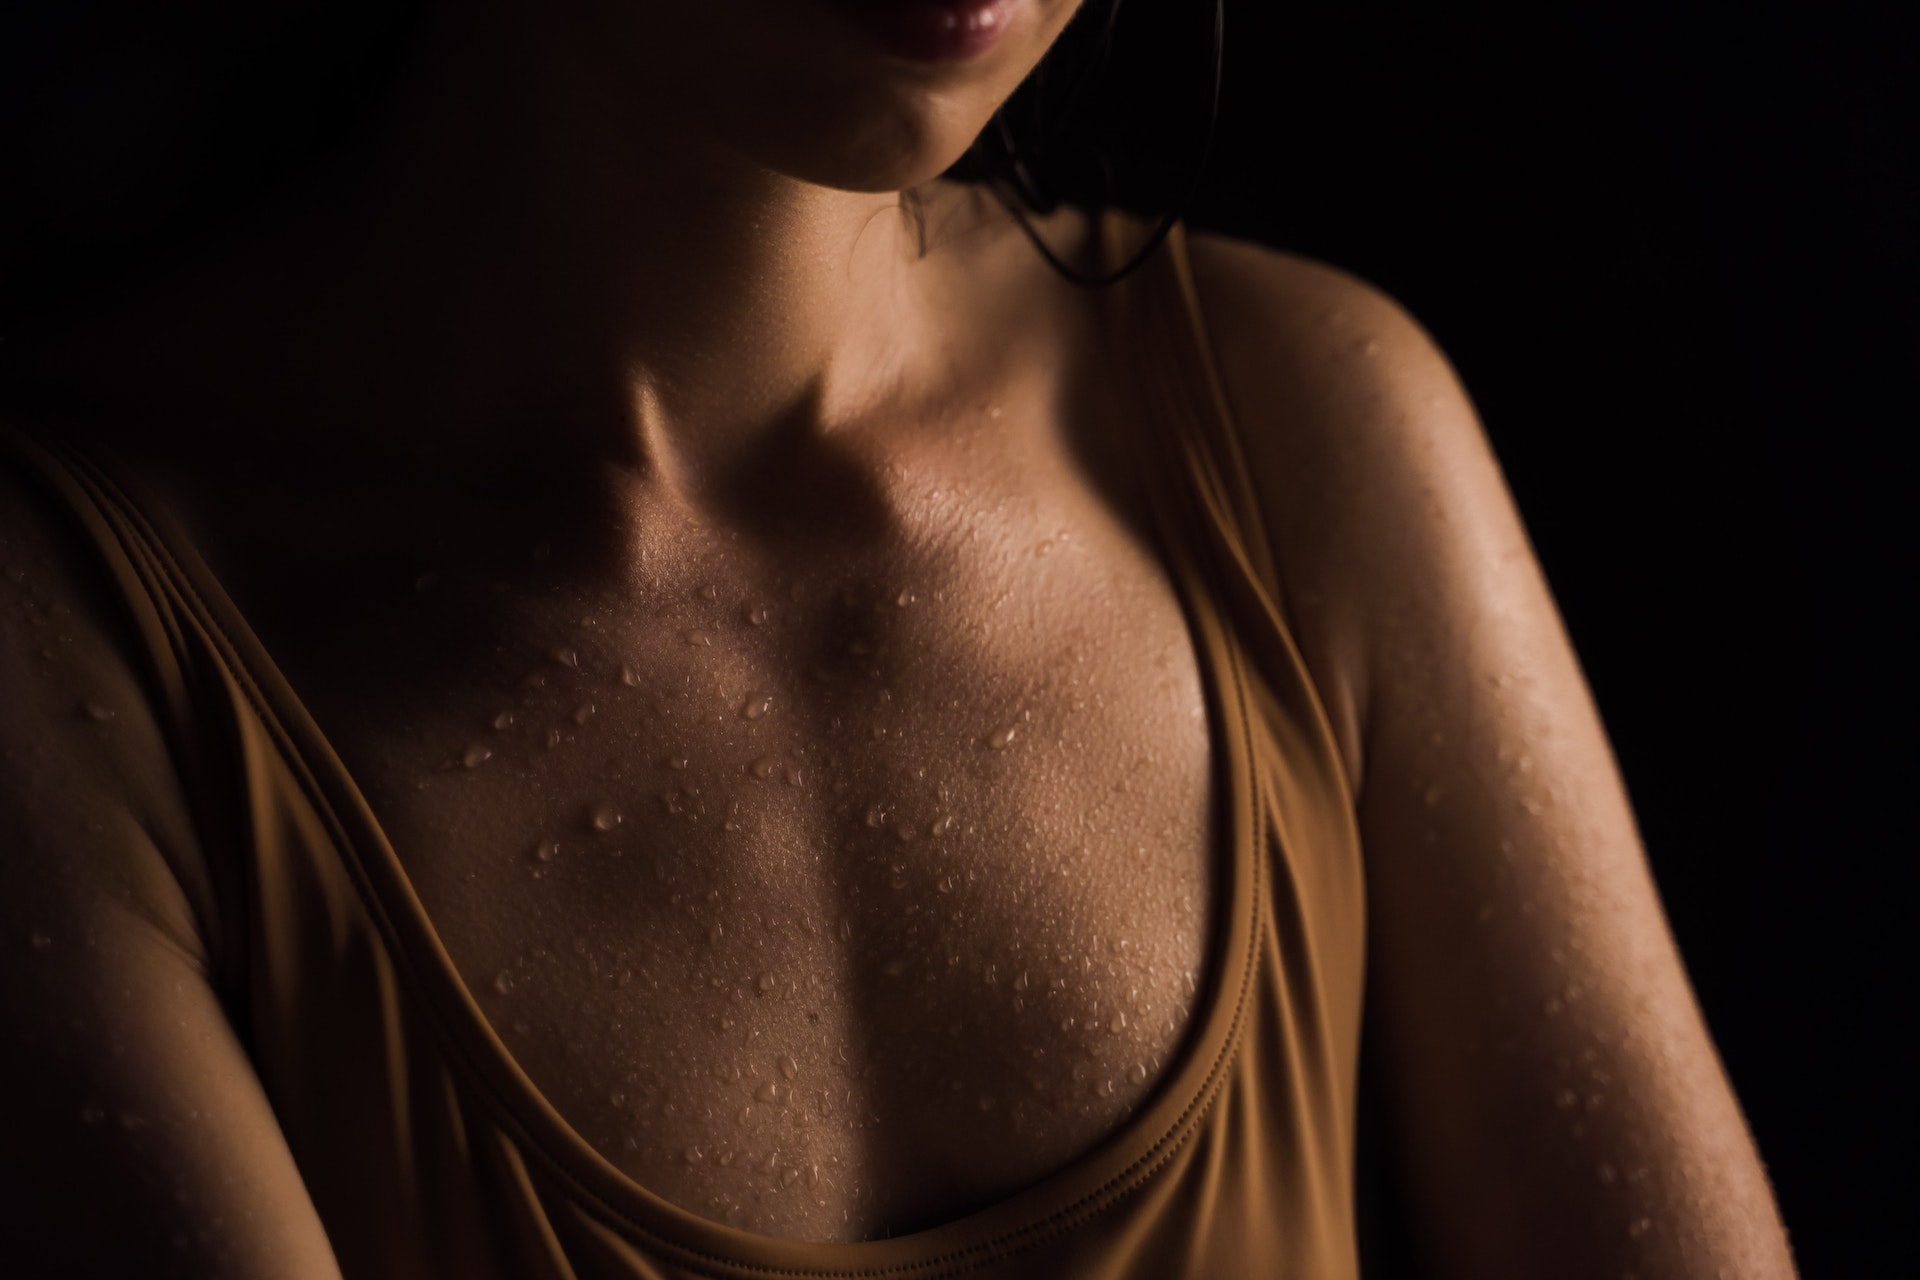 Wet Chest of a Woman